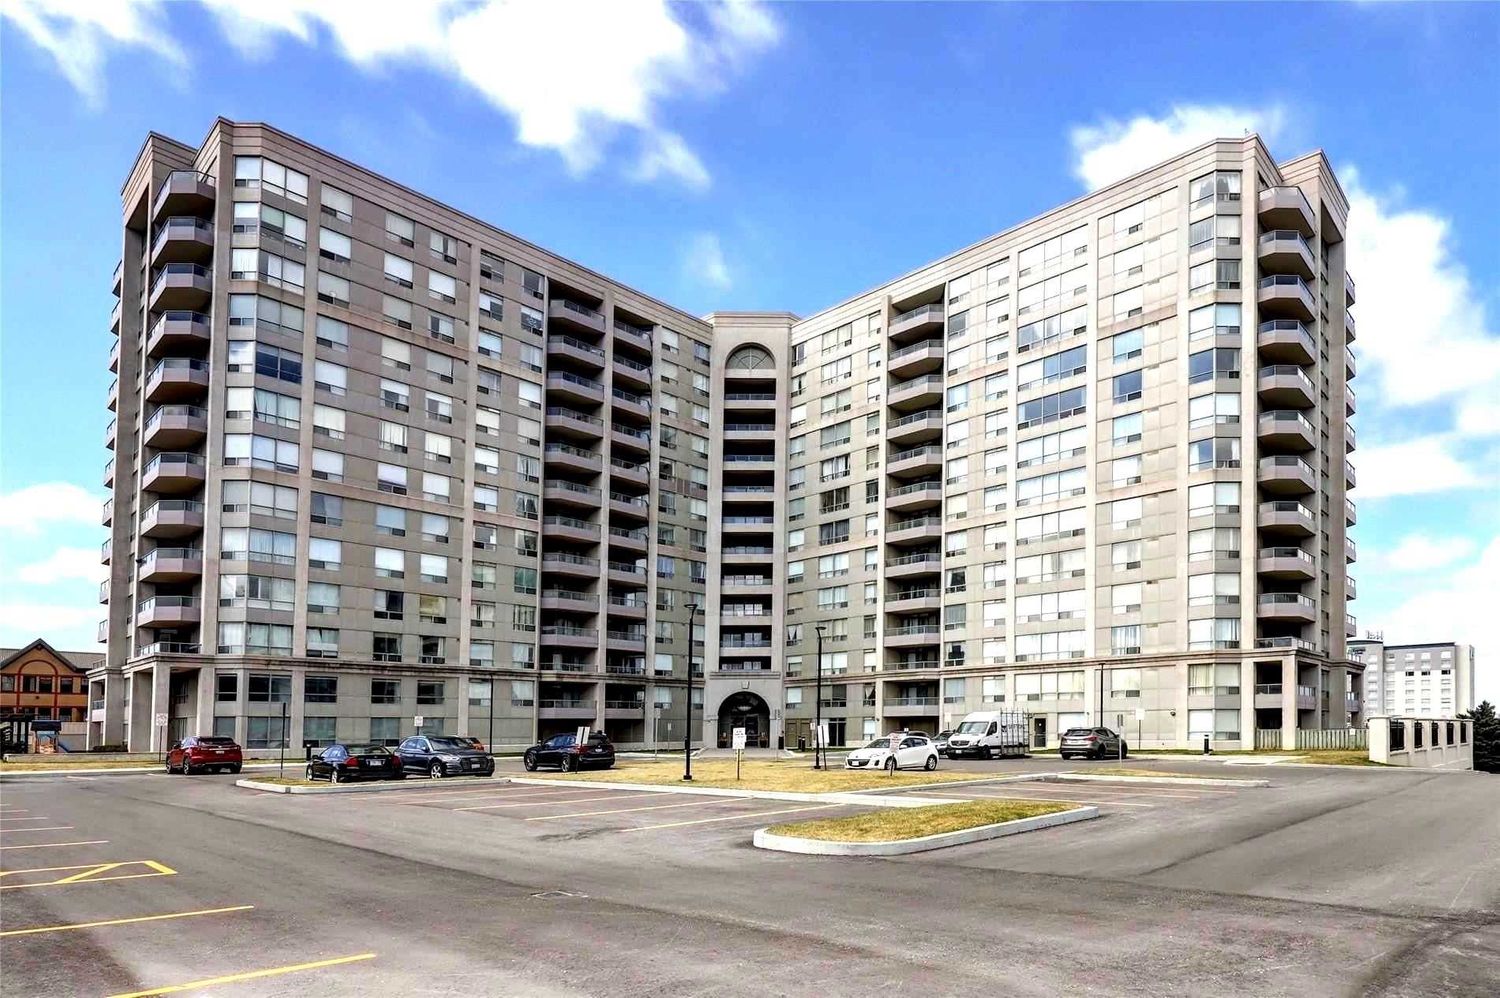 9015 Leslie Street. Grand Parkway Residences I Condos is located in  Richmond Hill, Toronto - image #1 of 2